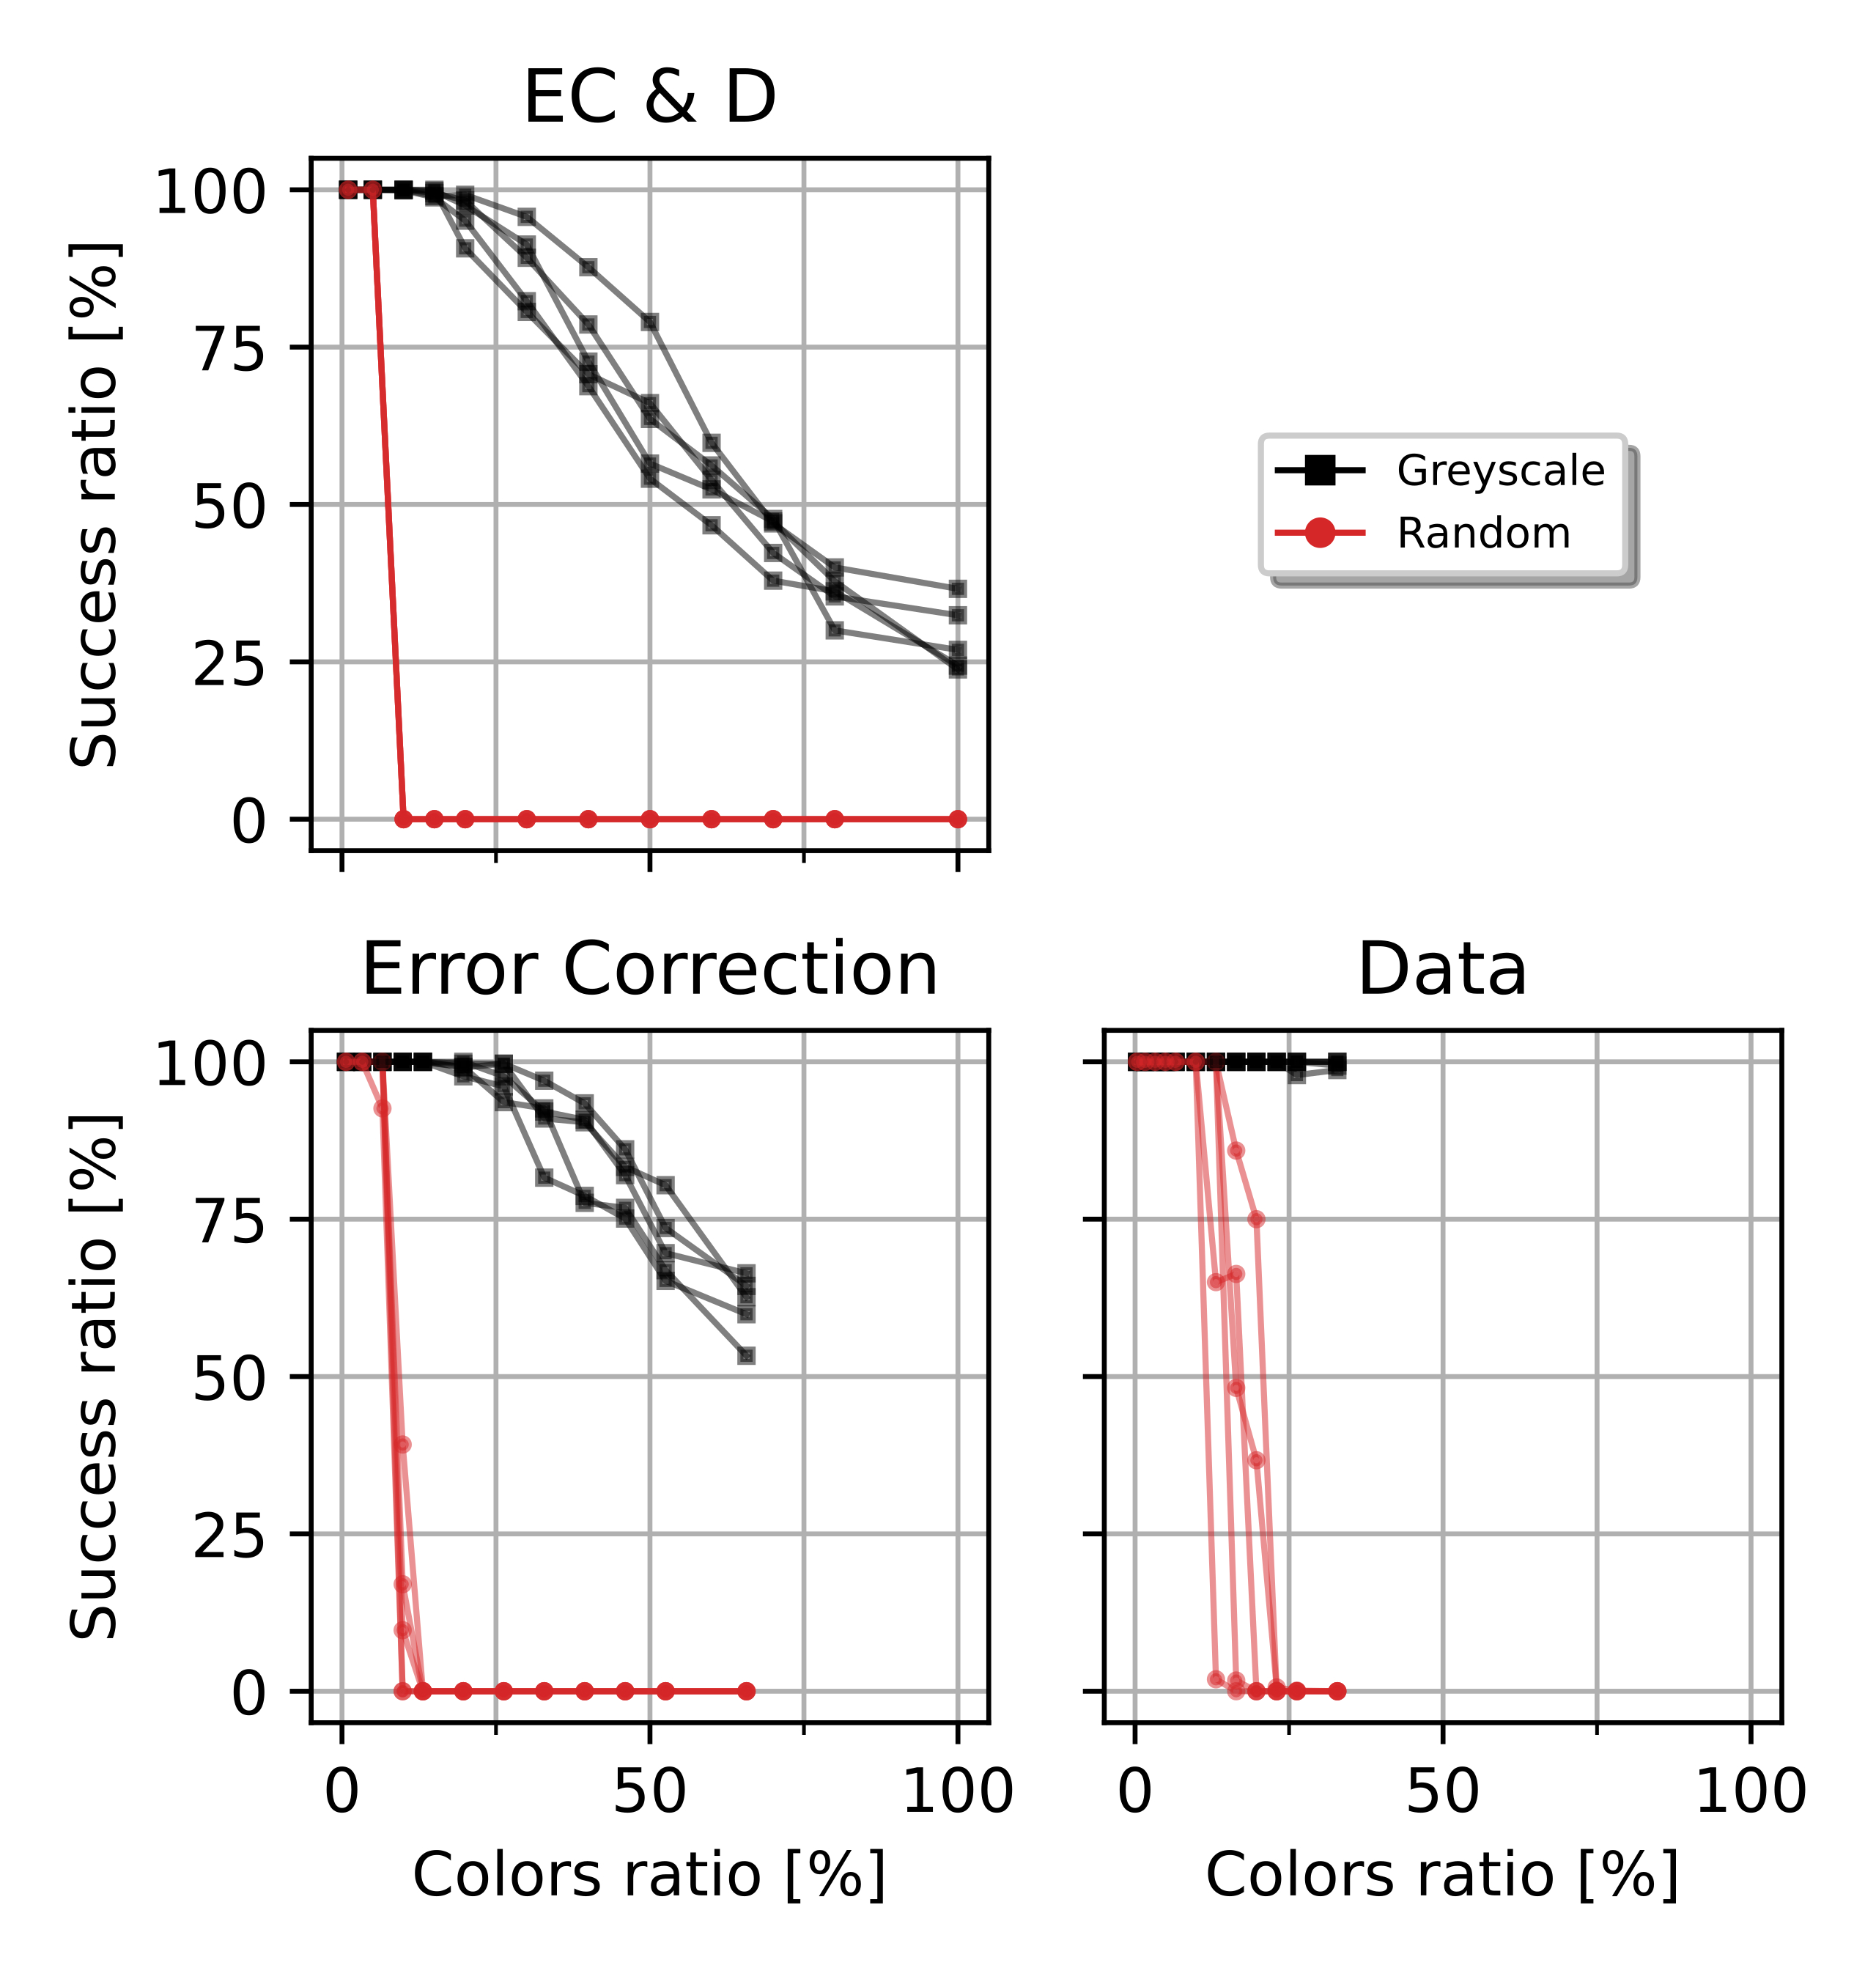 Success ratio of decoded QR Codes after passing through an image augmentation channel among different embedding zones (EC&D, Error Correction and Data), for each color mapping method (greyscale and random) for all QR Code versions. Each curve represents a QR Code version, there are up to 5 curves for each method, Greyscale (squares, black) and Random (dots, red).